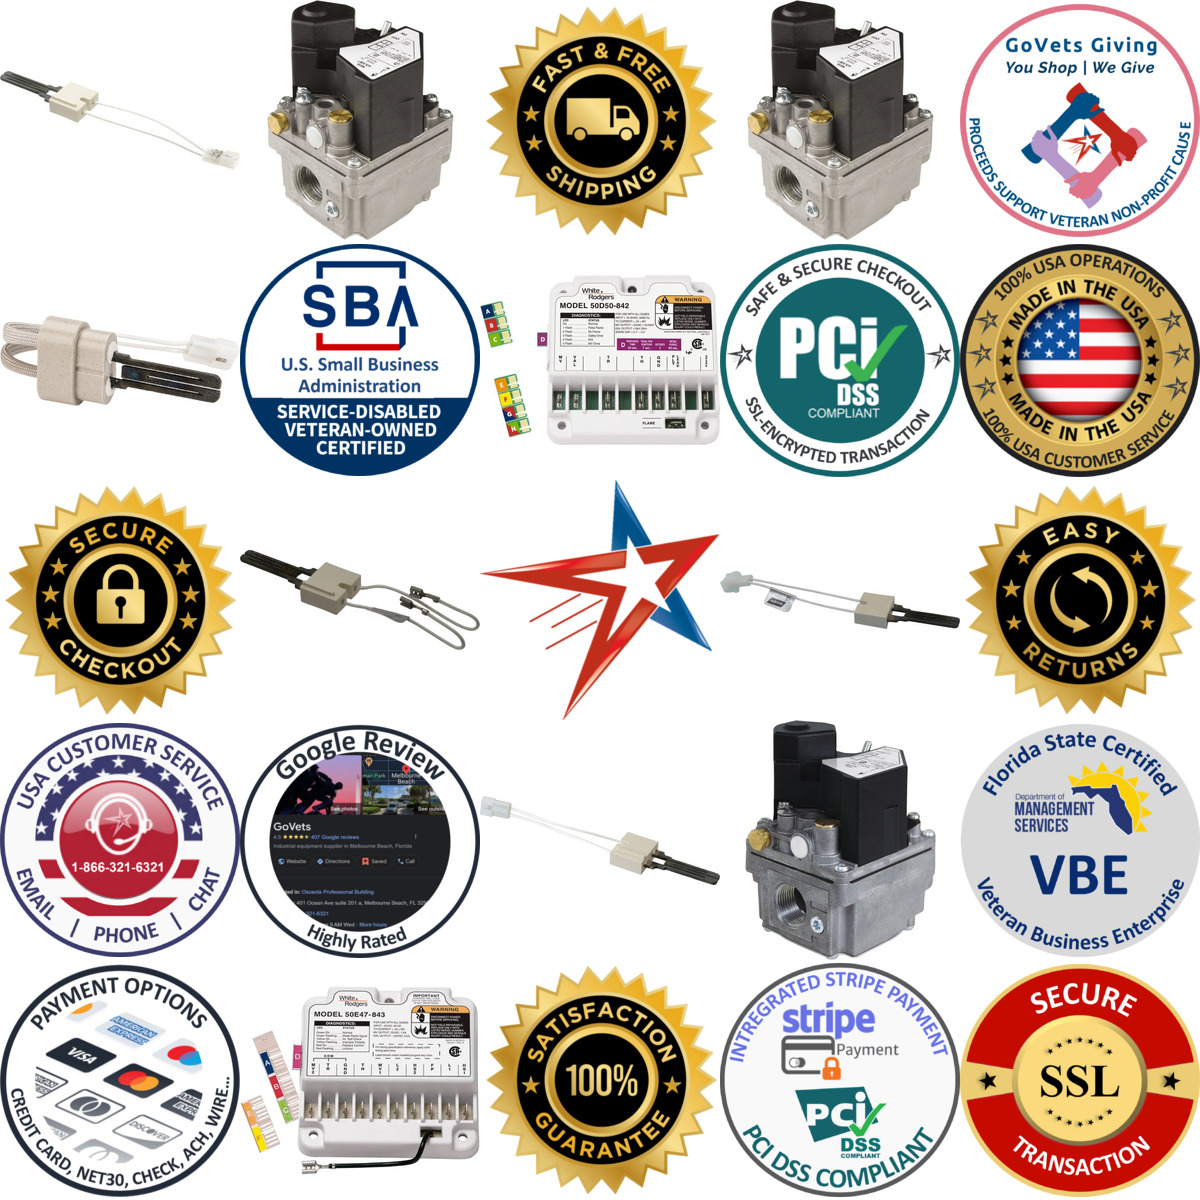 A selection of Ignition Controls products on GoVets